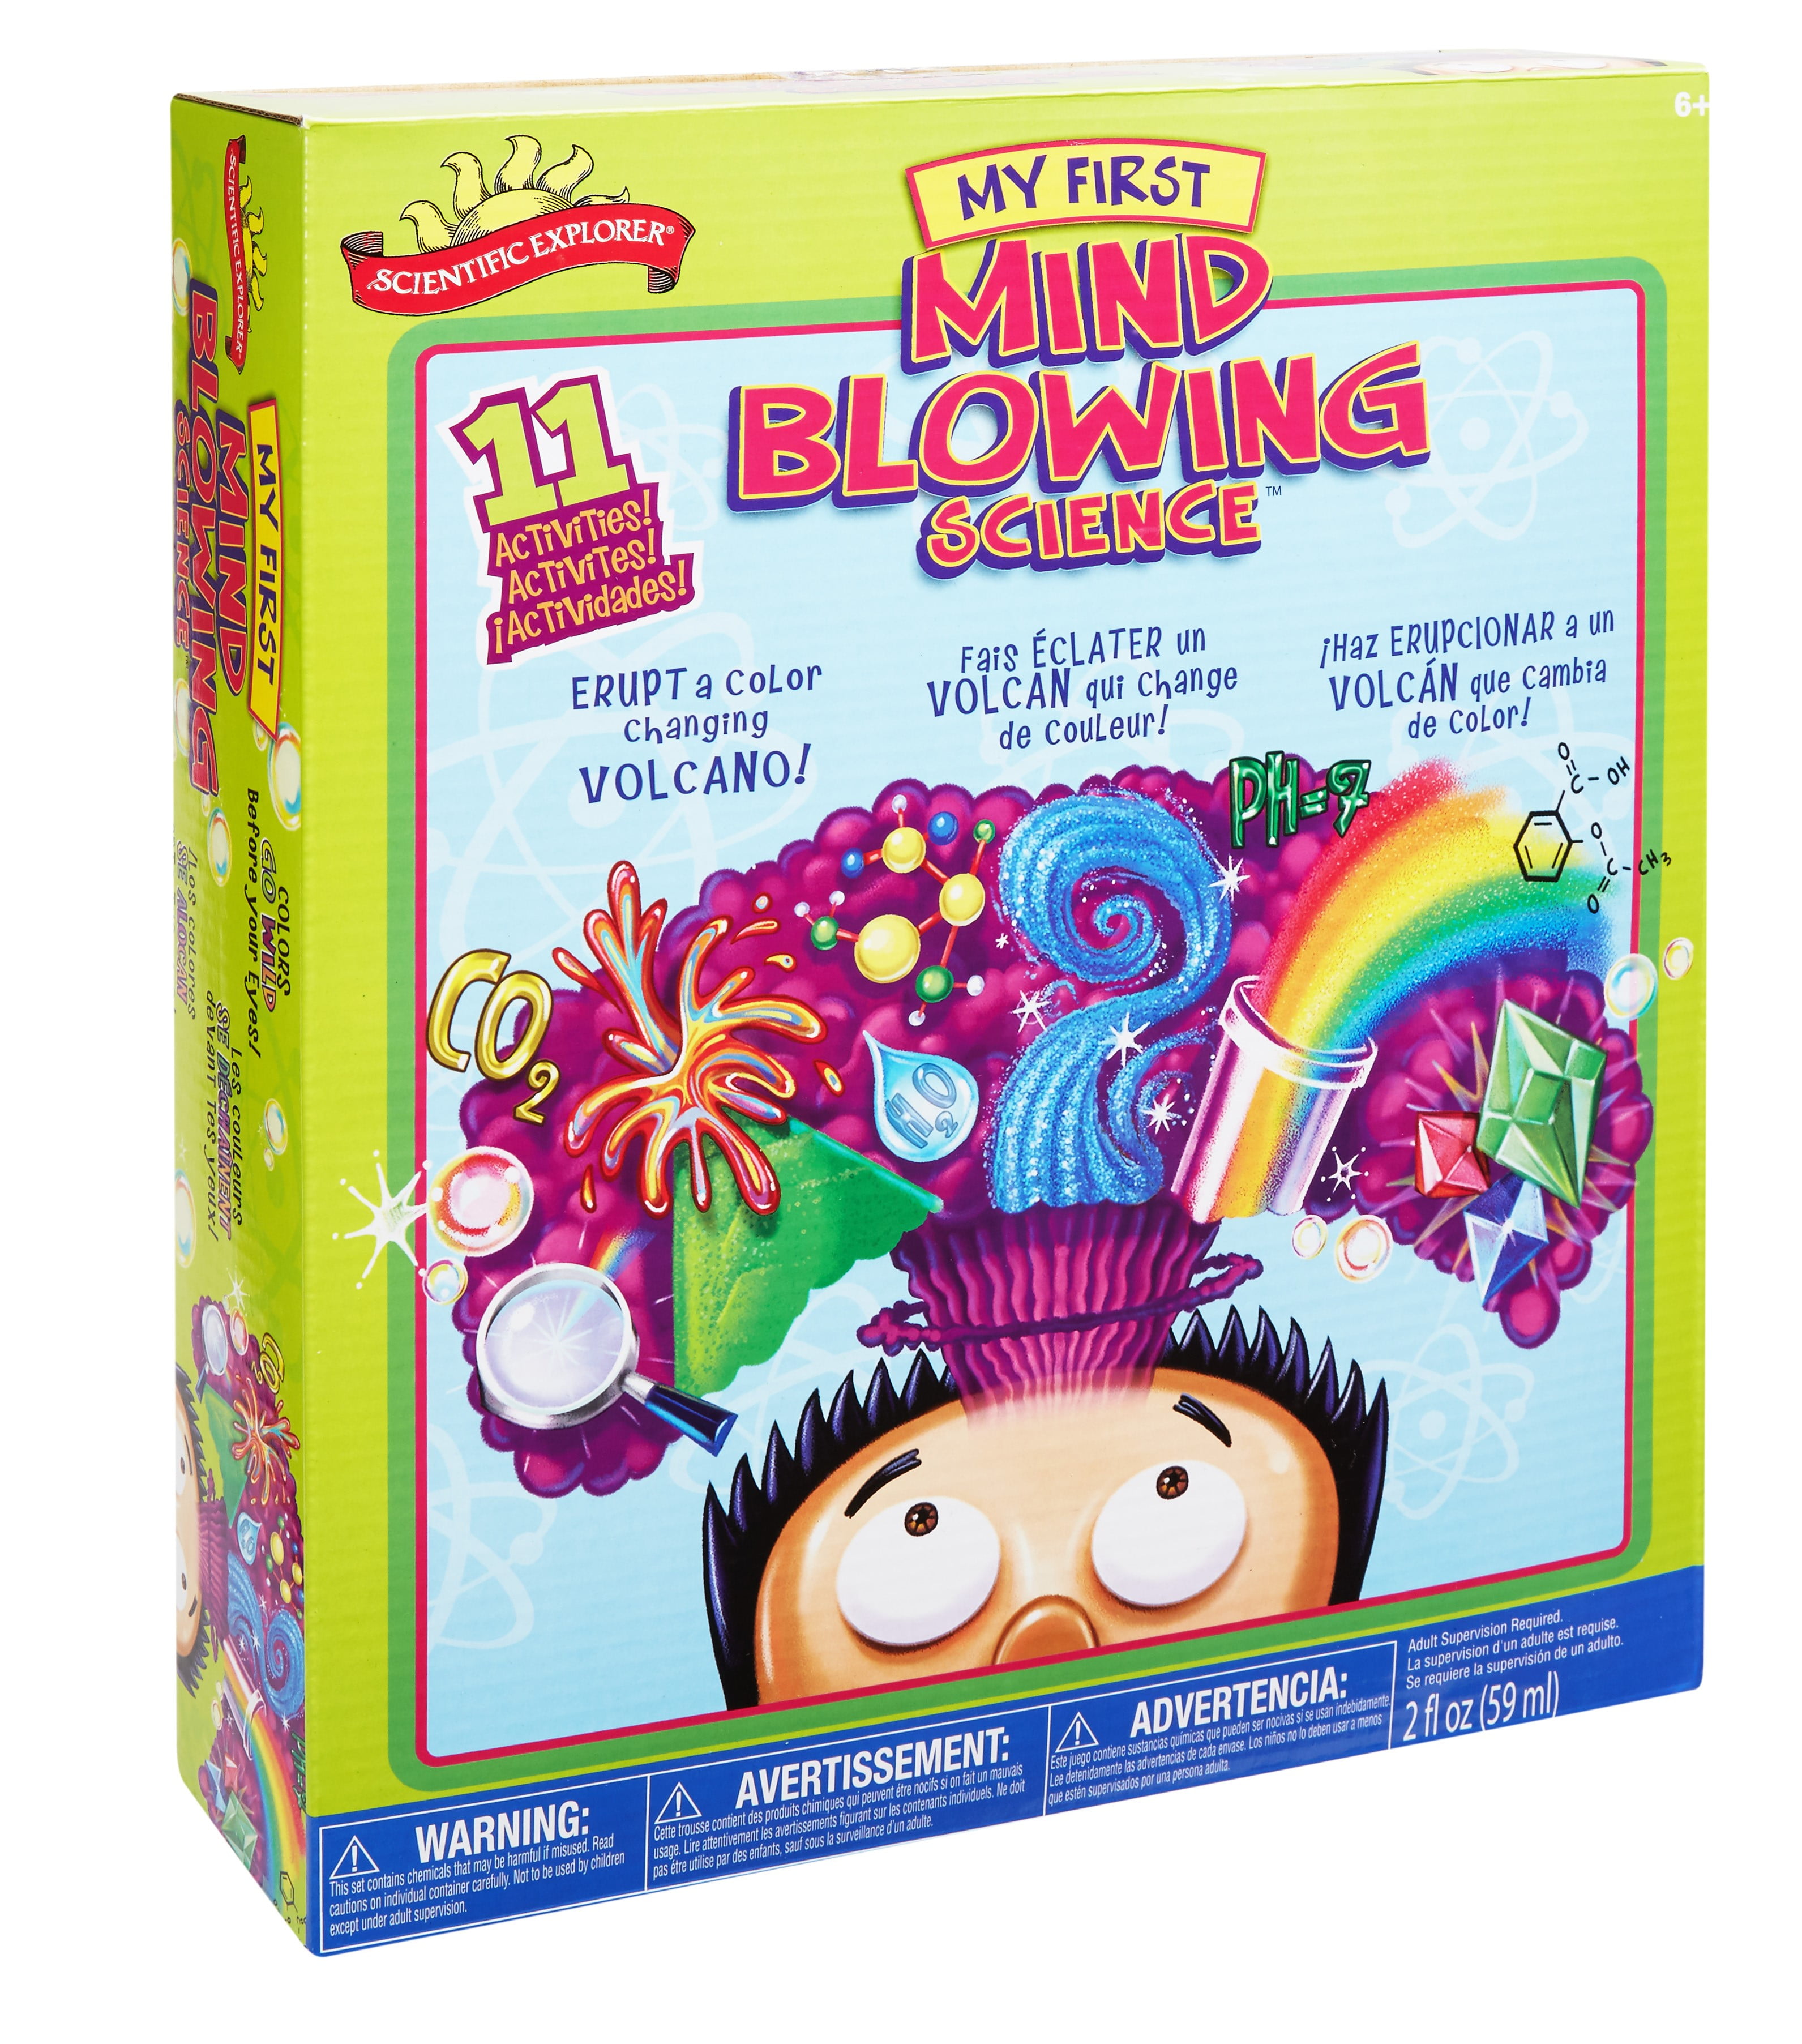 Details about   Scientific Explorer My First Mind Blowing Science Kids Science Experiment Kit 